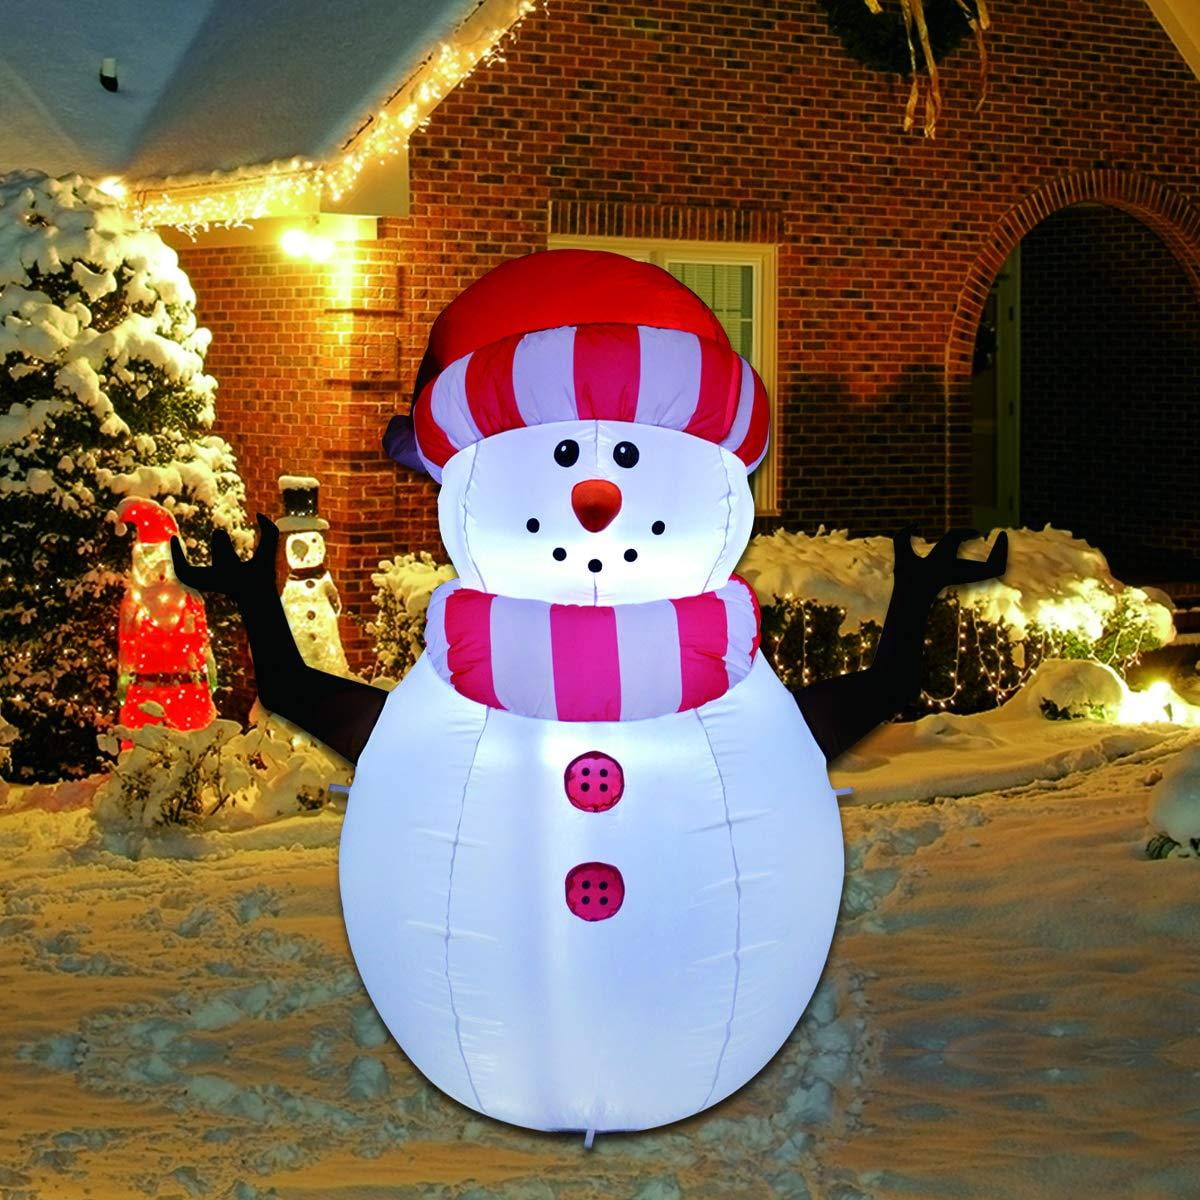 Unique Christmas Blow Up Decorations Ideas in 2022